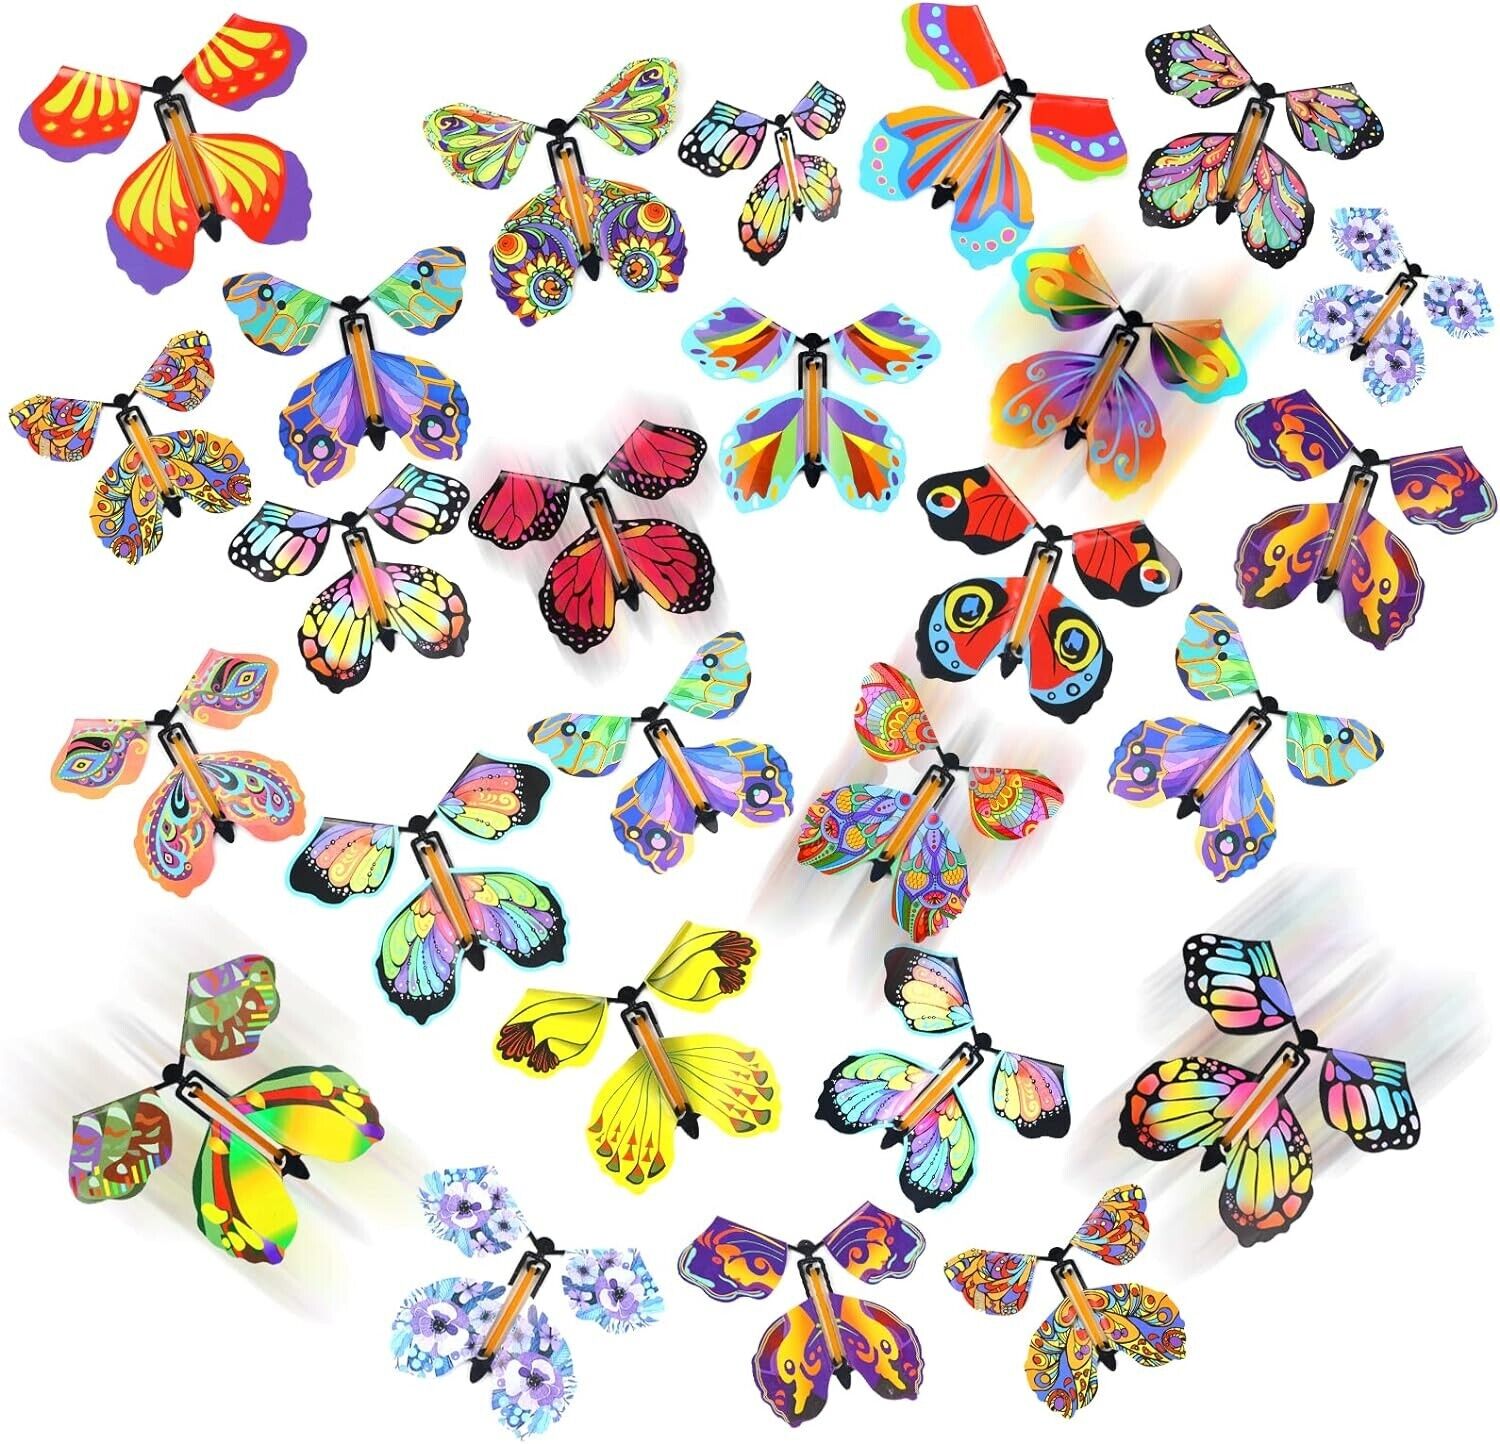 20 PIECES Butterfly Magic Flying Surprise Toy for Explosion Box Gift Fillers NEW